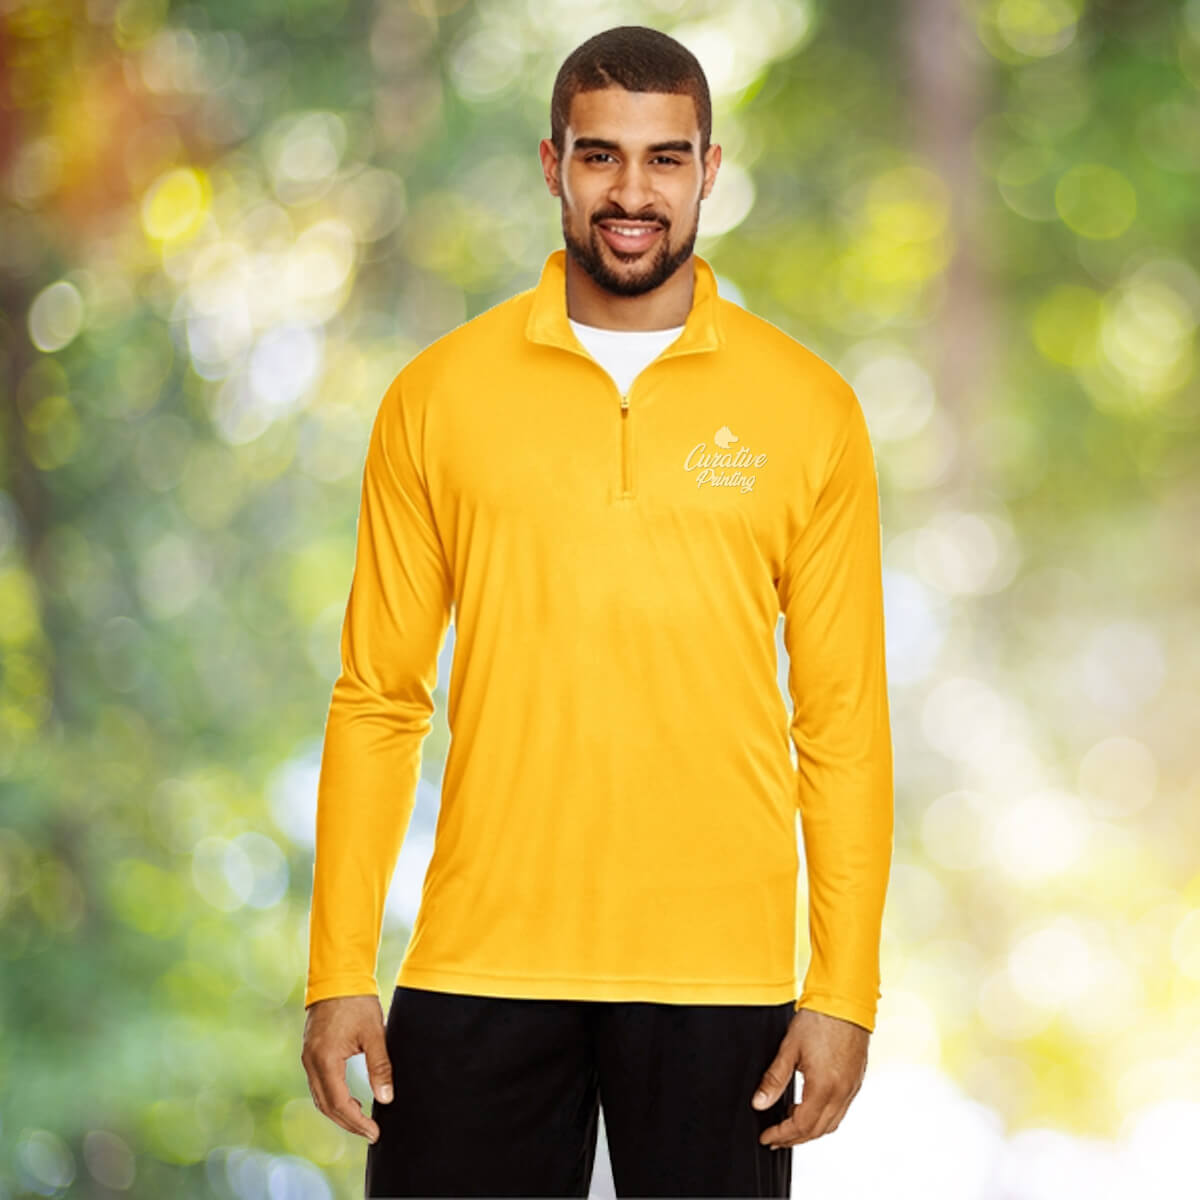 Man in the outdoors wearing yellow quarter zip sweatshirt apparel with white curative printing logo imprint